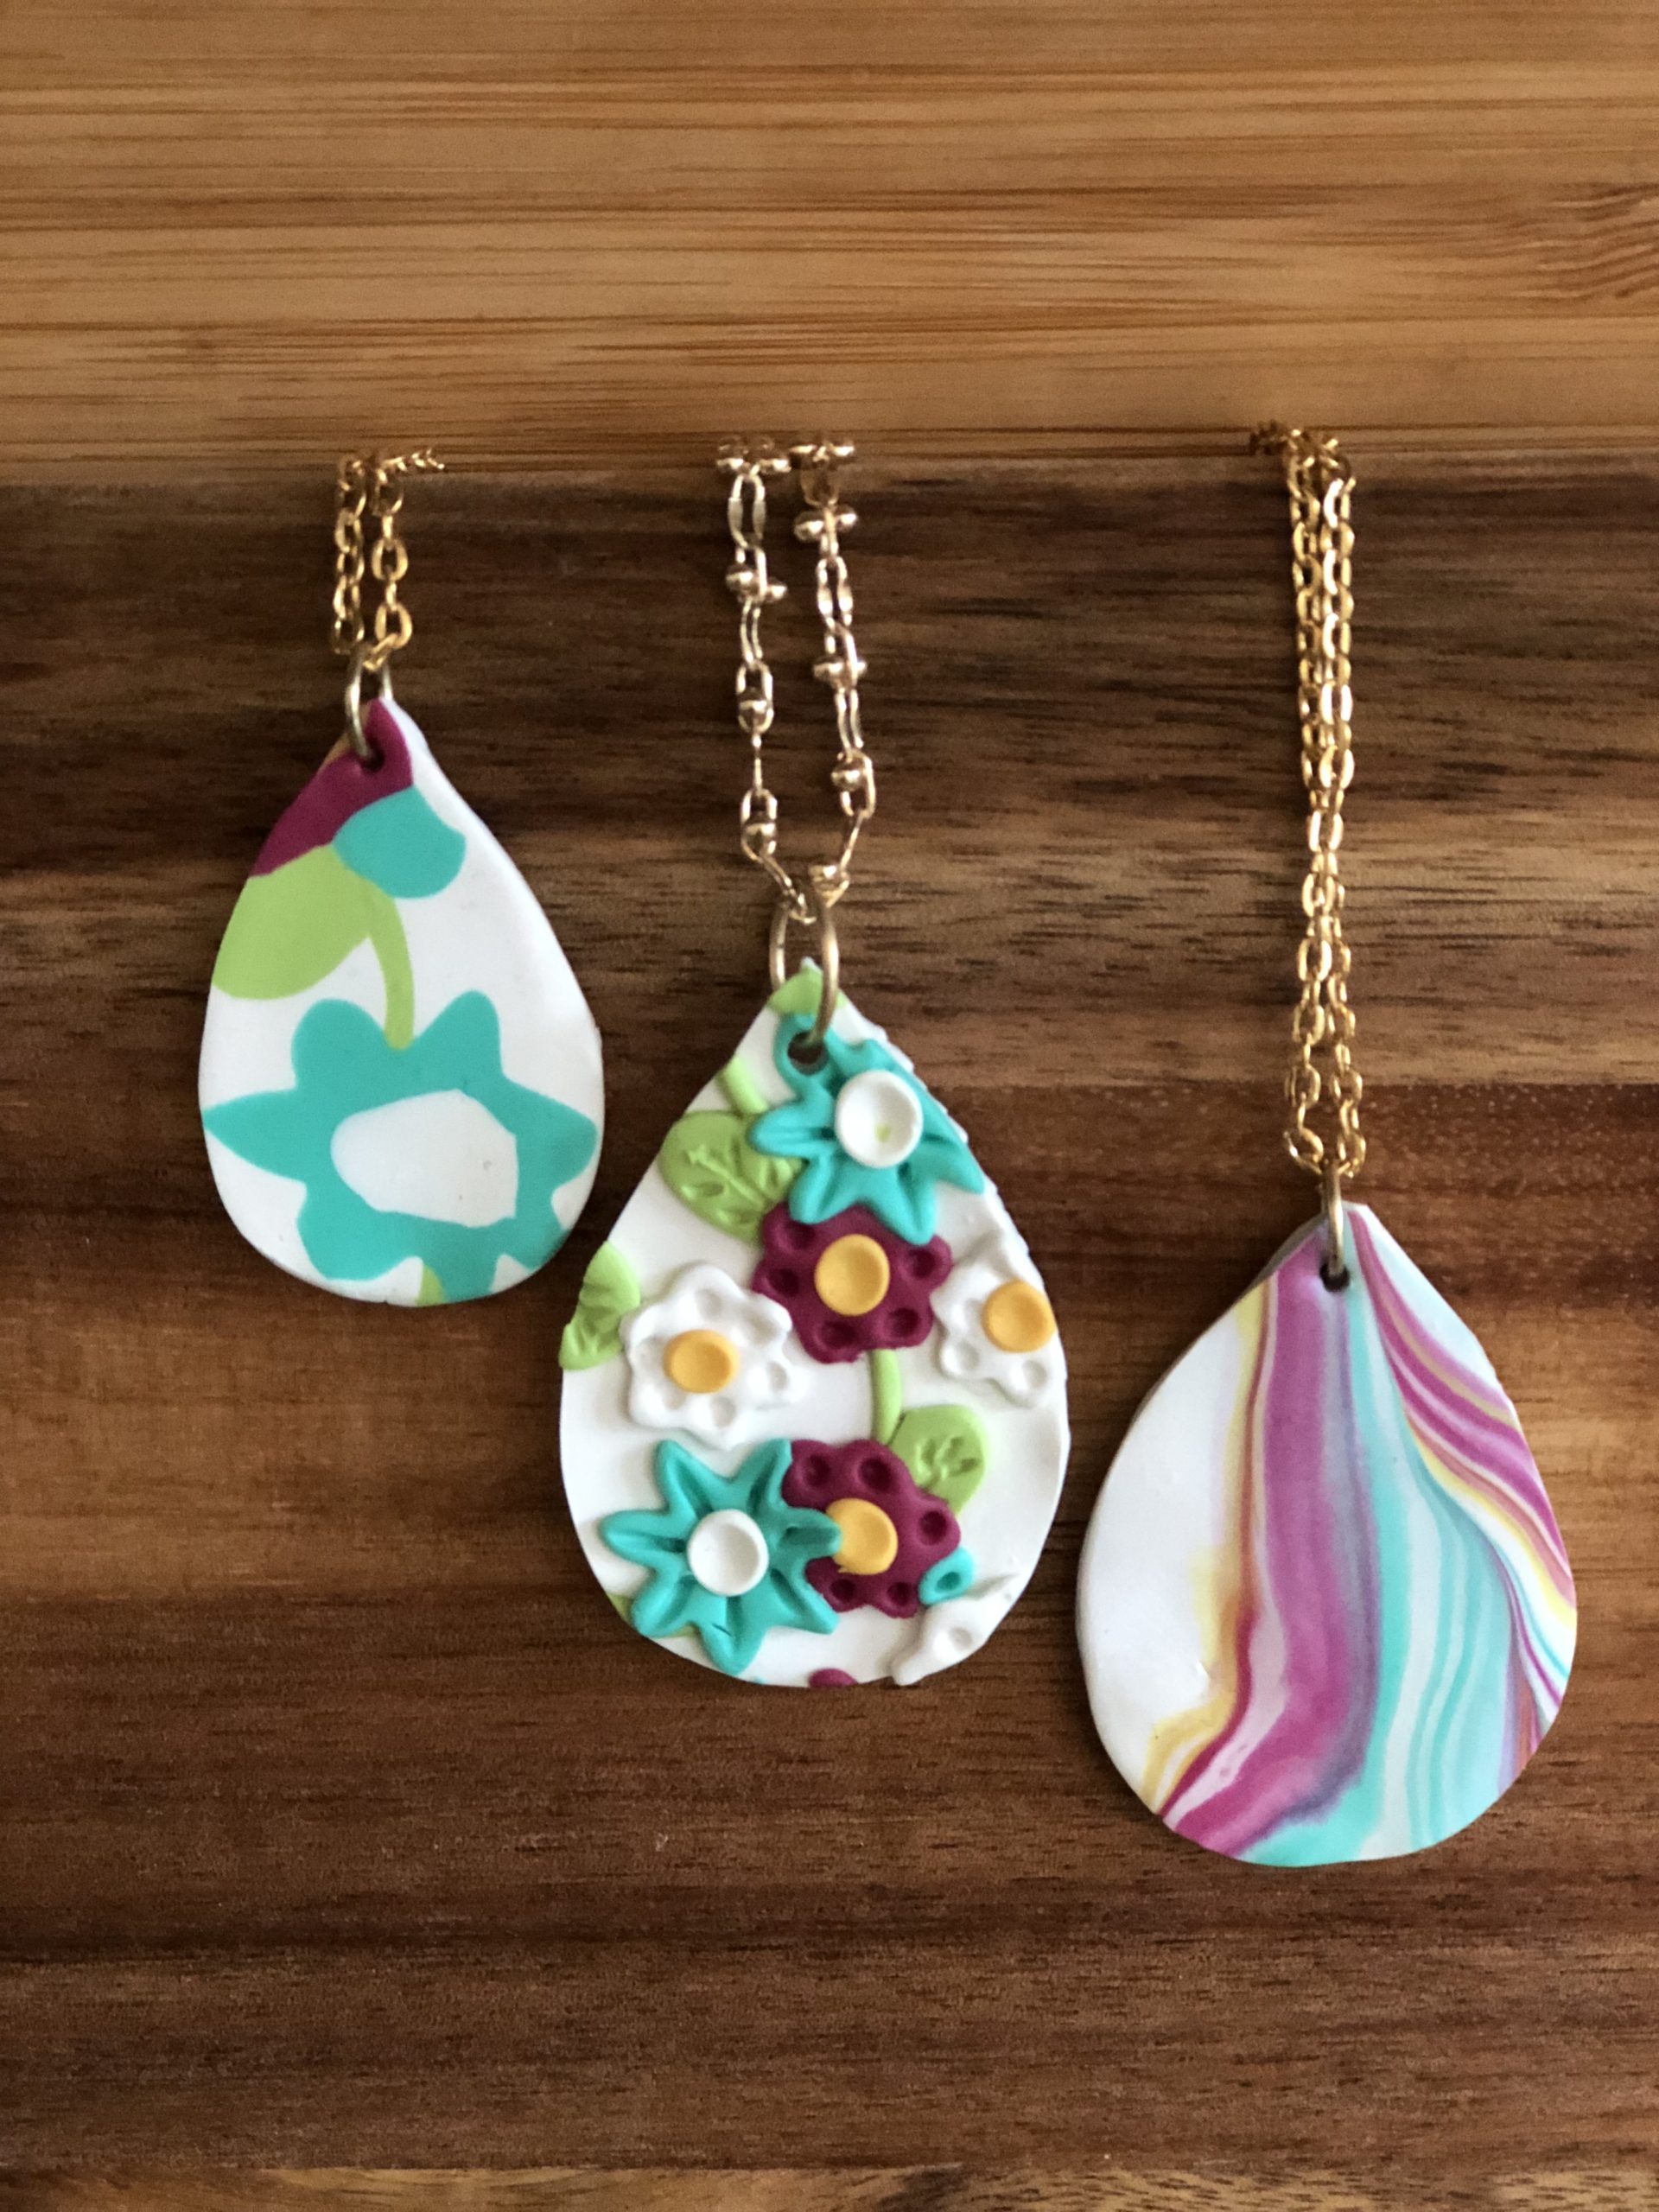 Geometric Pastel Tile Bags made with Sculpey Premo Polymer Clay - CATHIE  FILIAN's Handmade Happy Hour